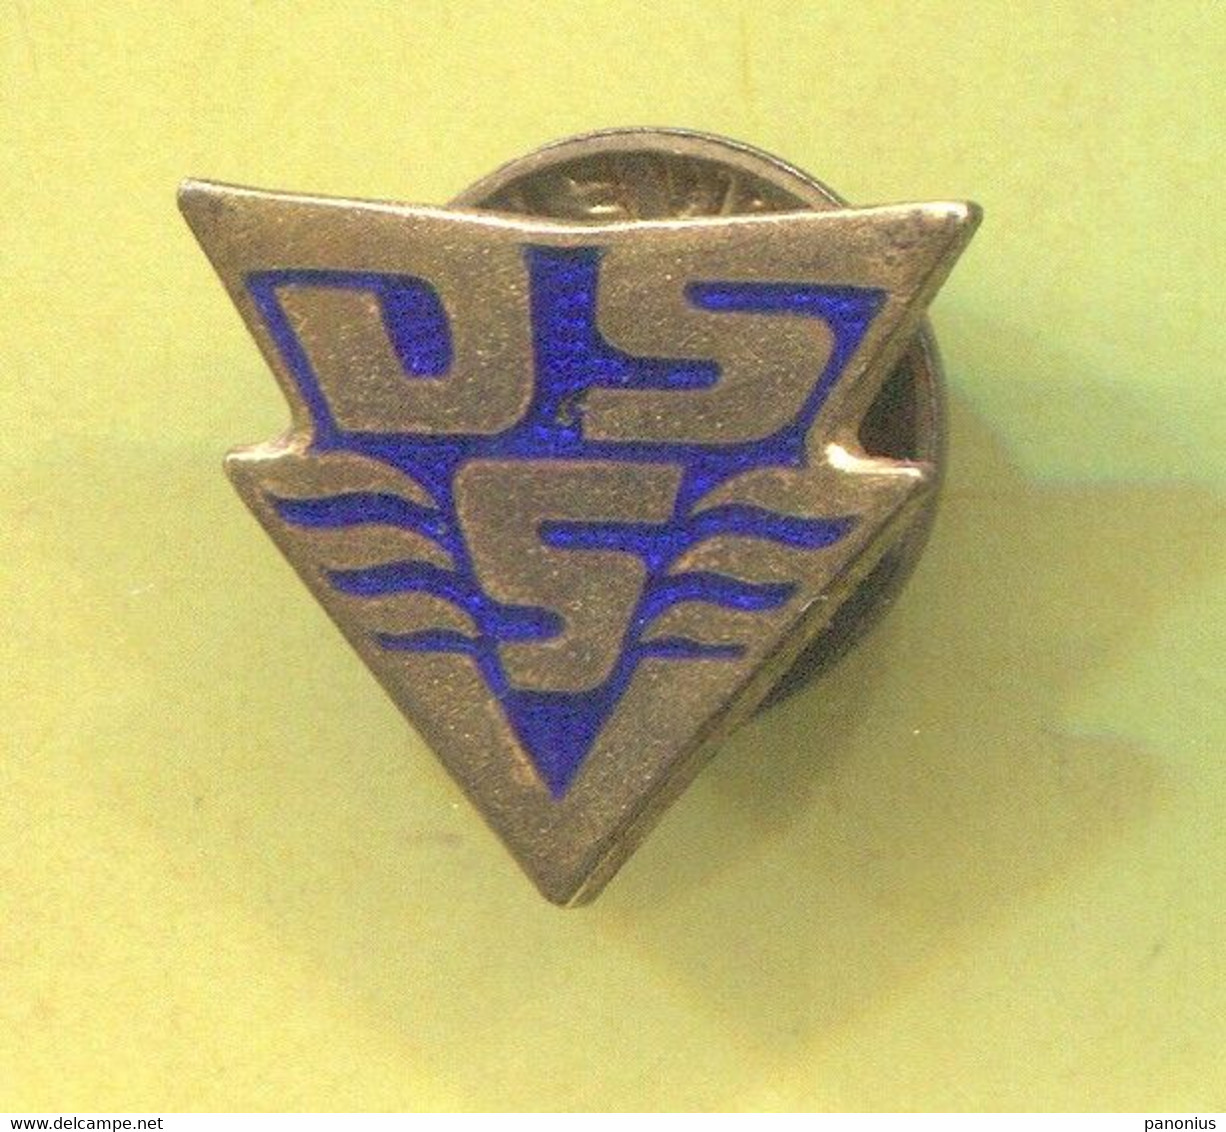 Swimming Natation - DDR East Germany, Vintage Pin Badge Abzeichen - Swimming